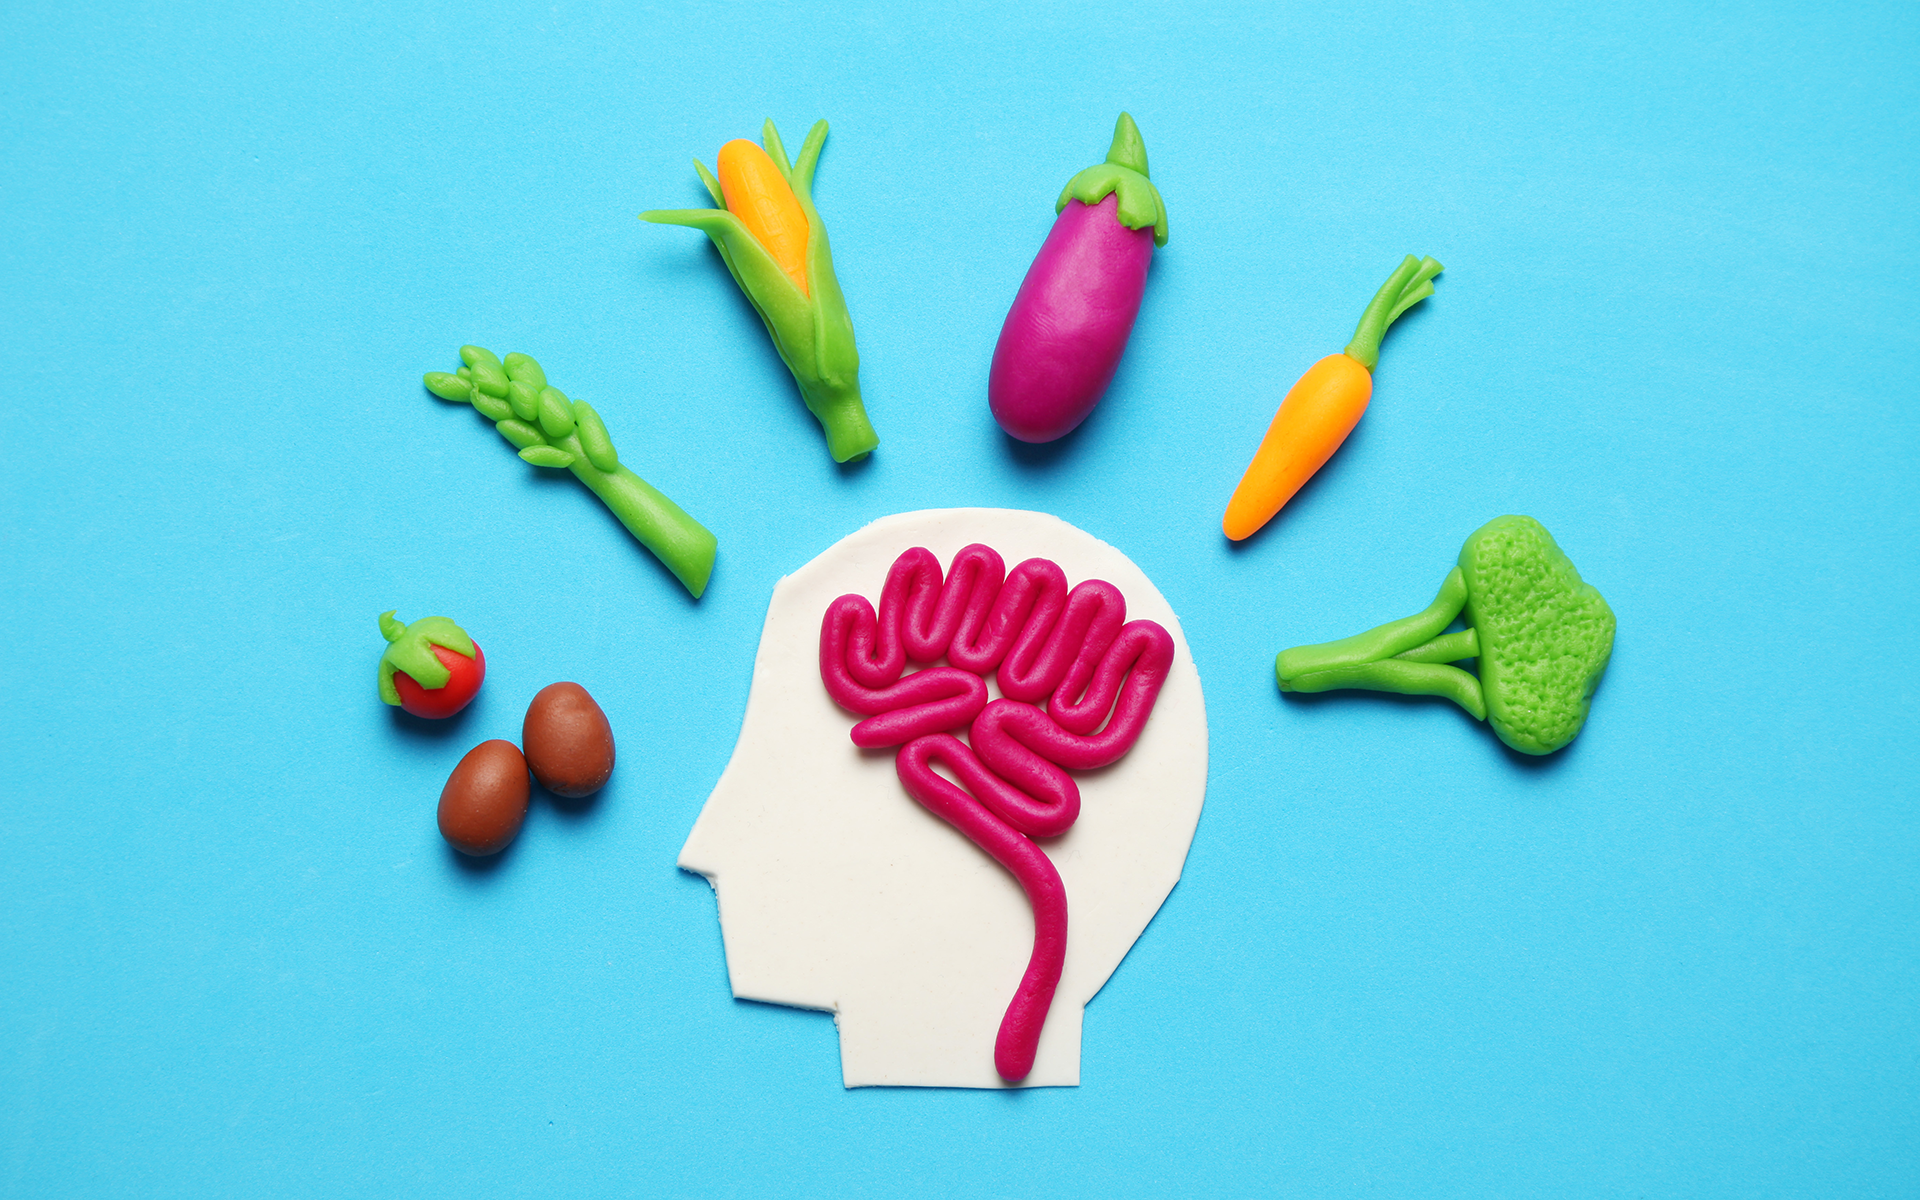 3 Ways to Improve Your Gut-Brain Connection (and Your Mood)—Plasticine healthy foods surround a white figure of someone's head.